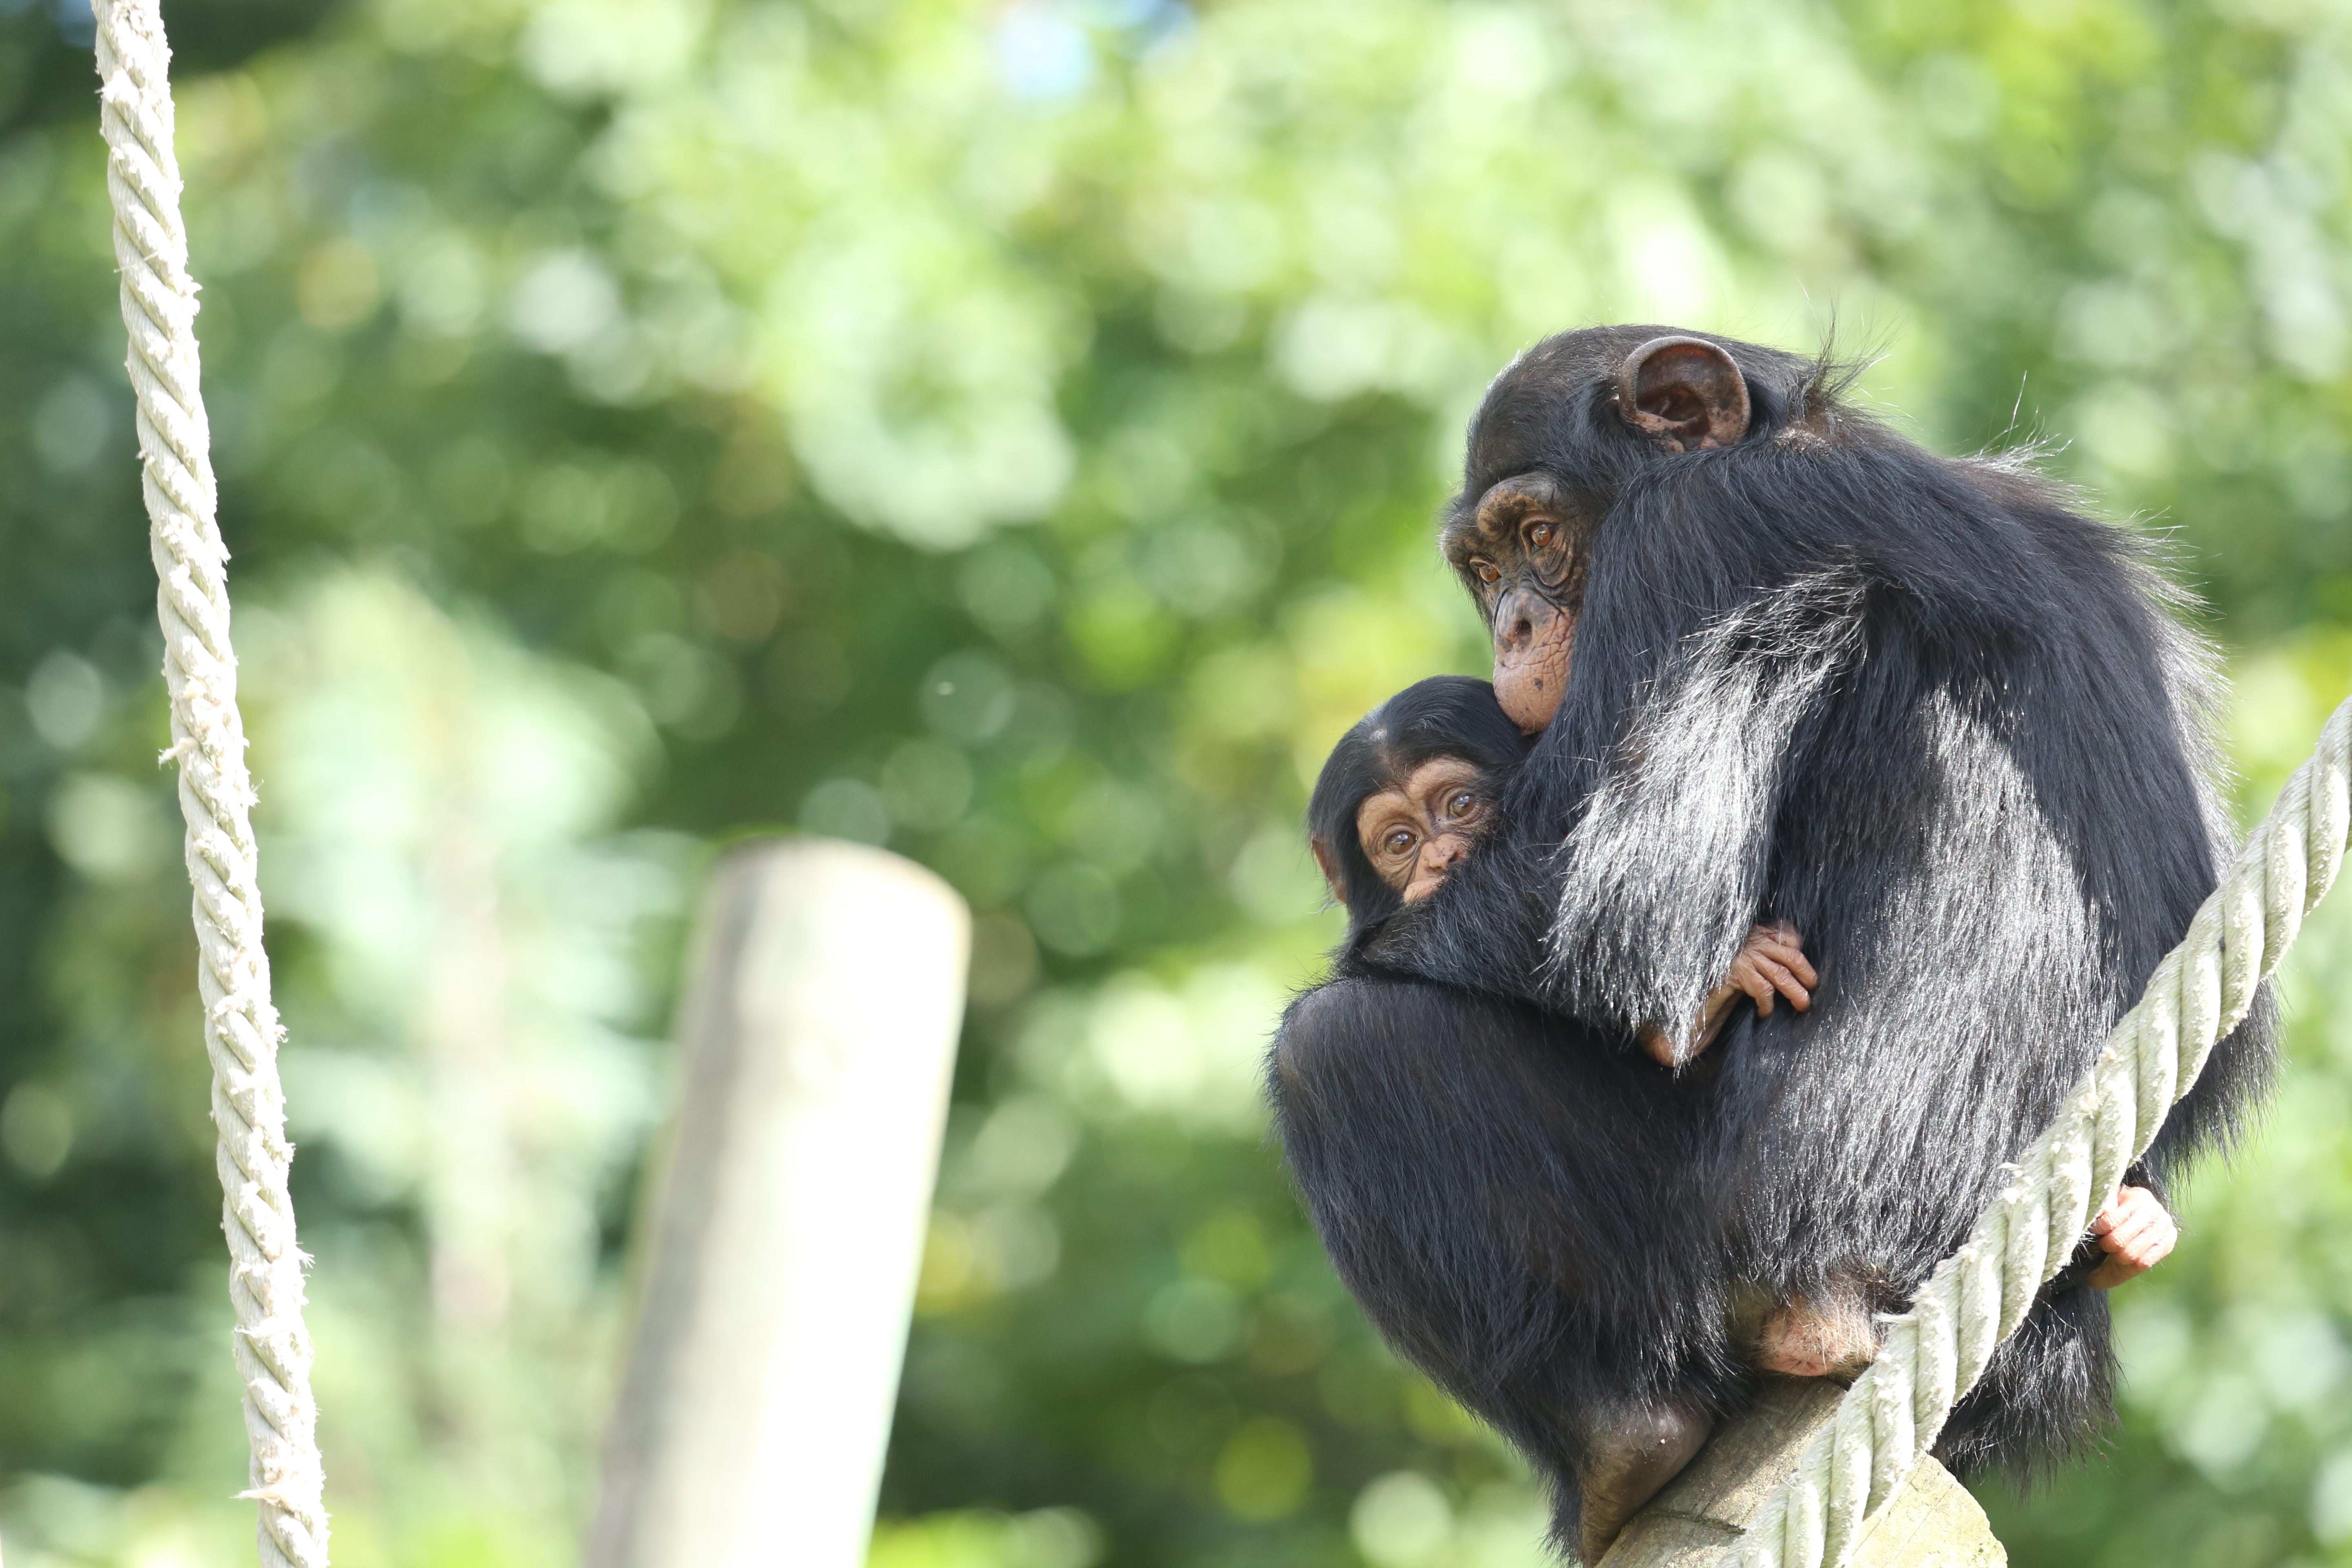 Two bonobos, a big and a small one, cling to each other, balanced on a post, with a rope running behind them.